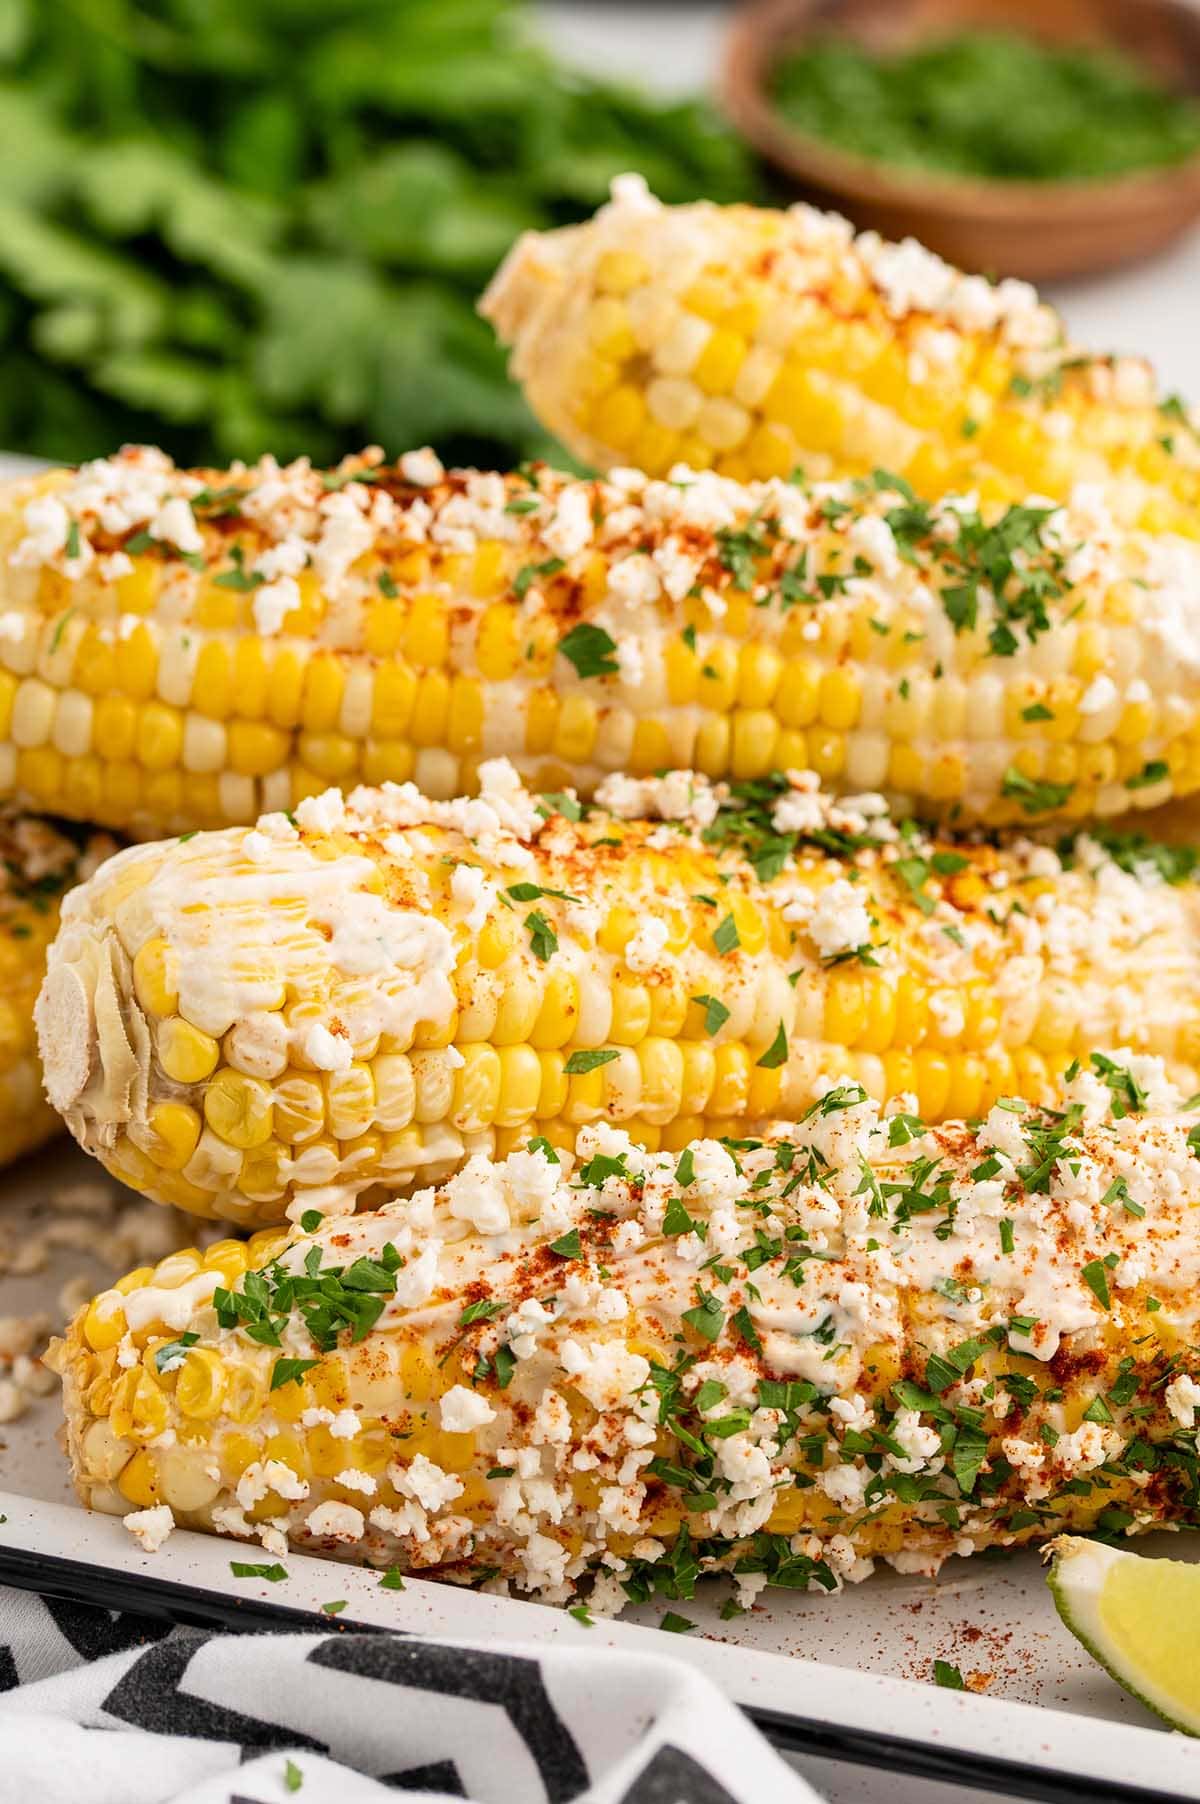 mexican corn on the cob with cotija cheese, chili powder and parsley.